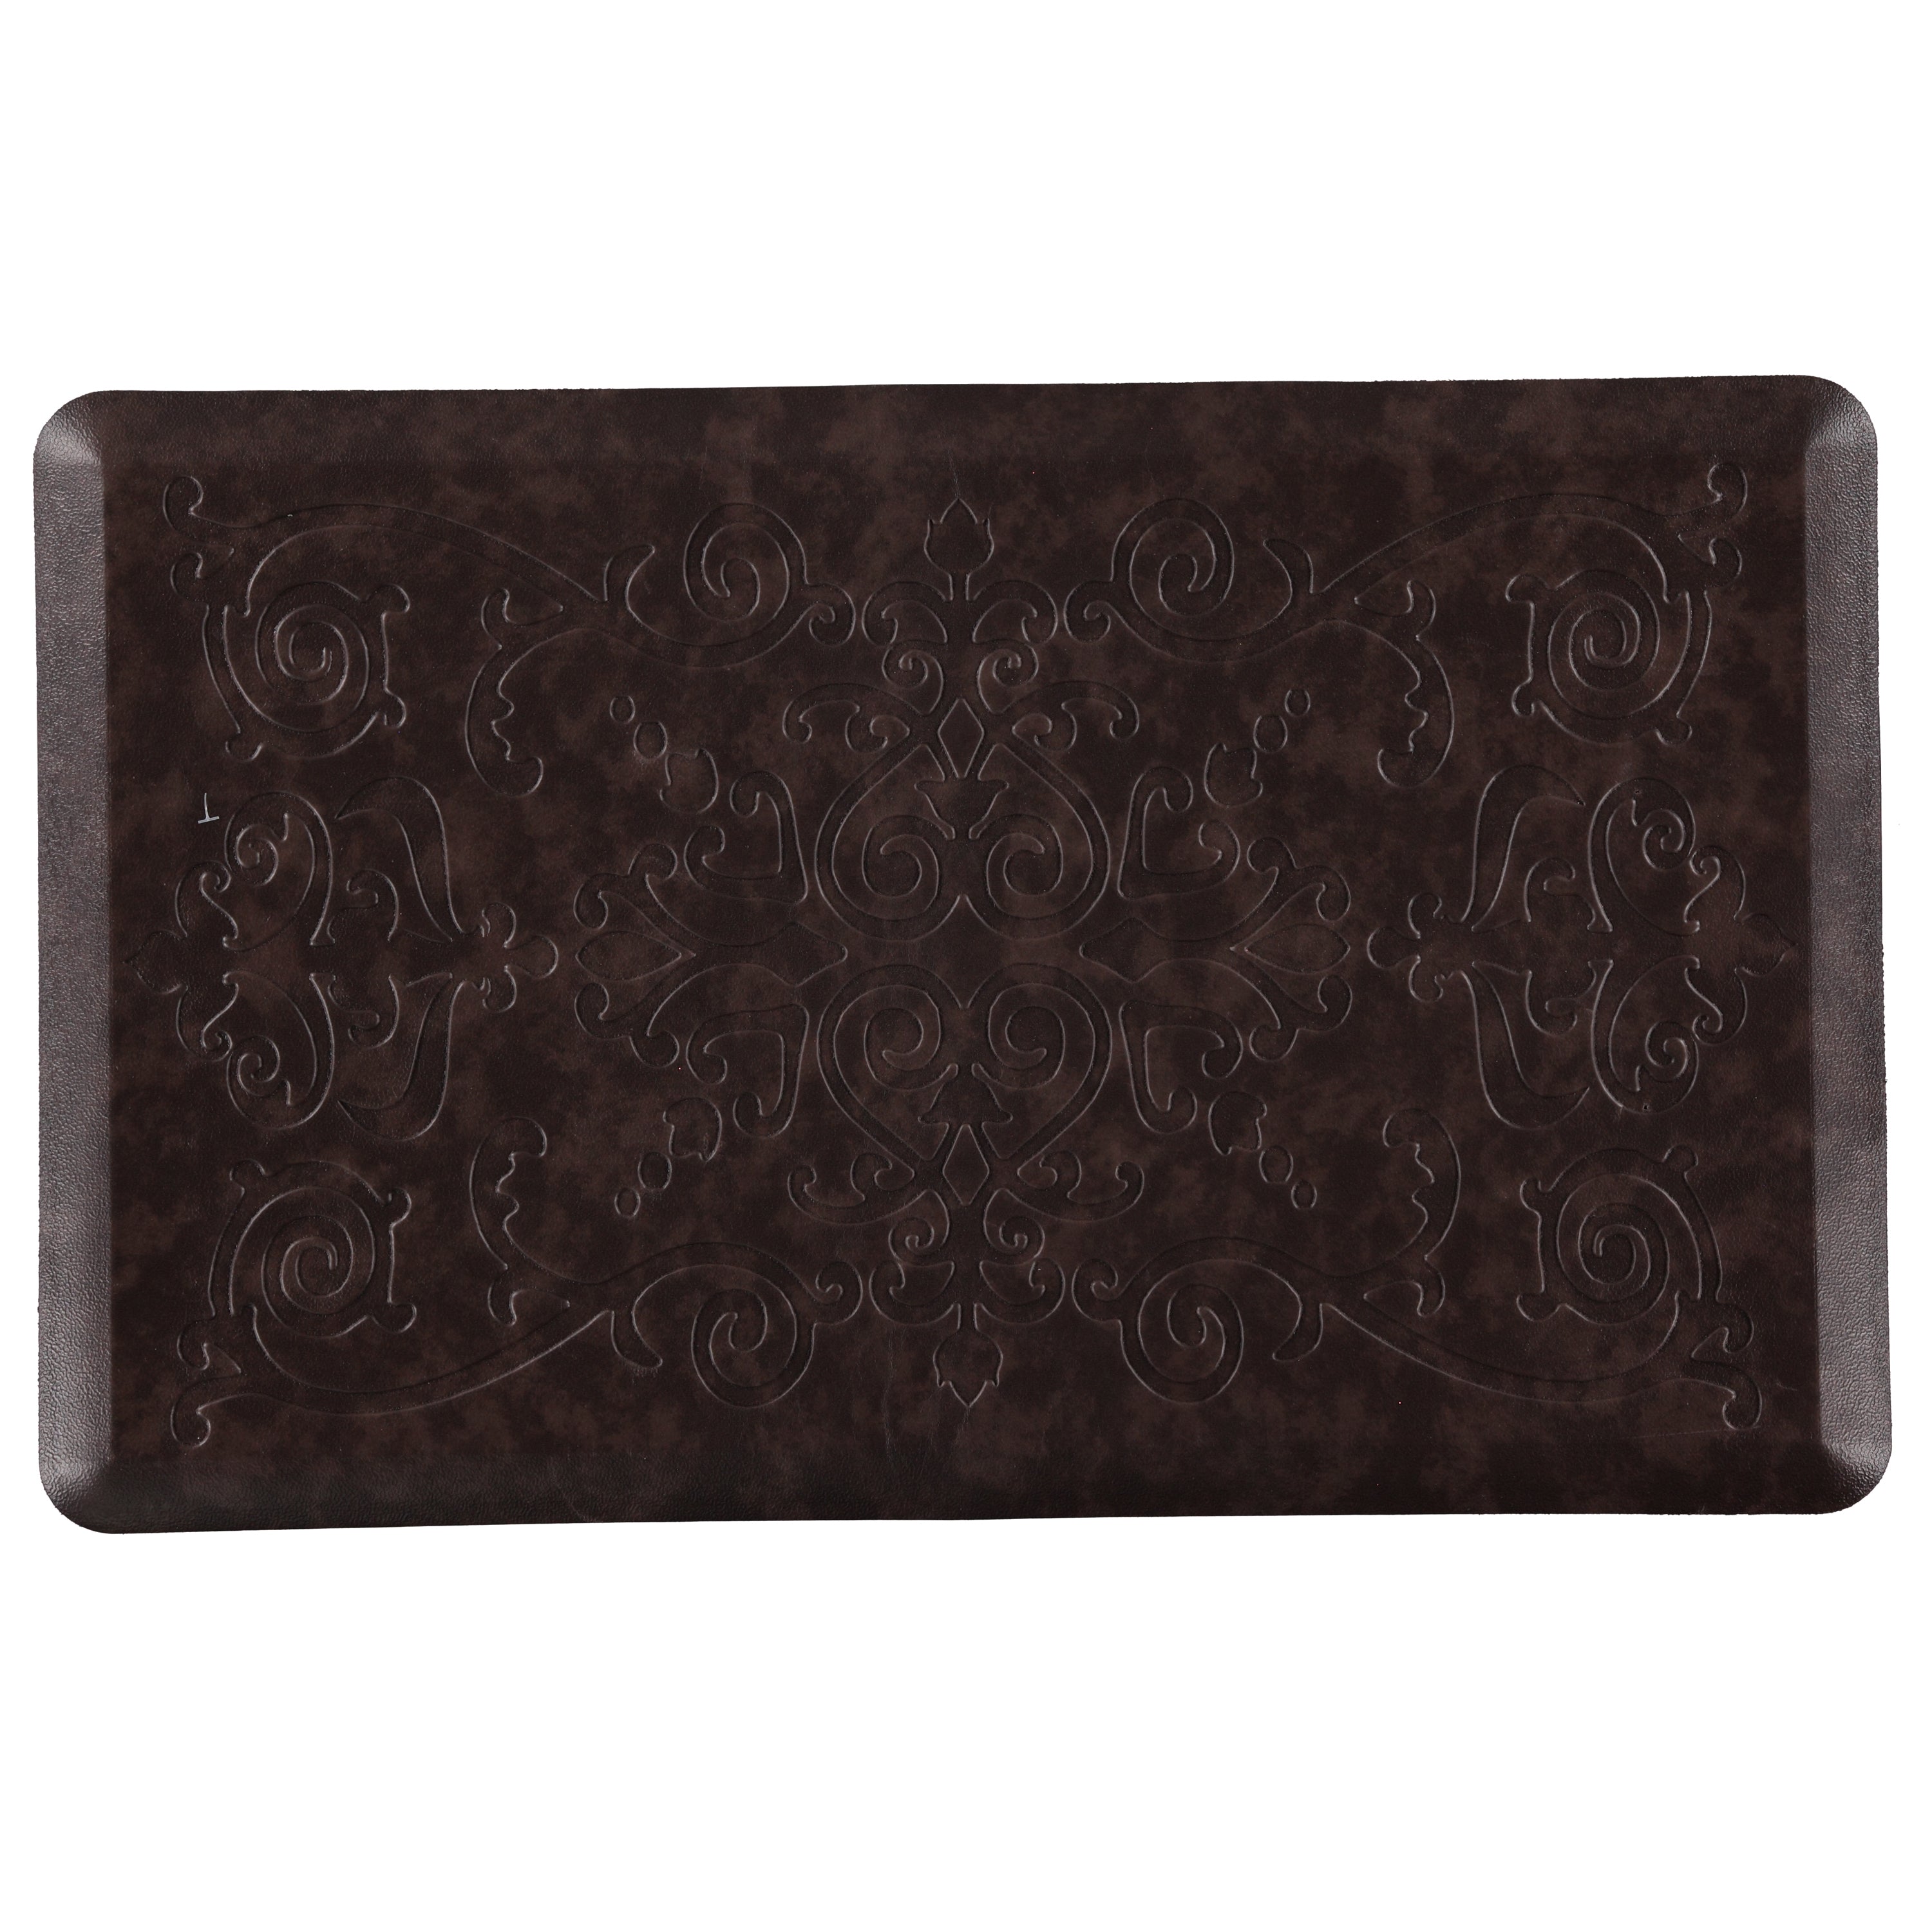 Medallion Anti-Fatigue Embossed Mat (Multiple Sizes & Colors)